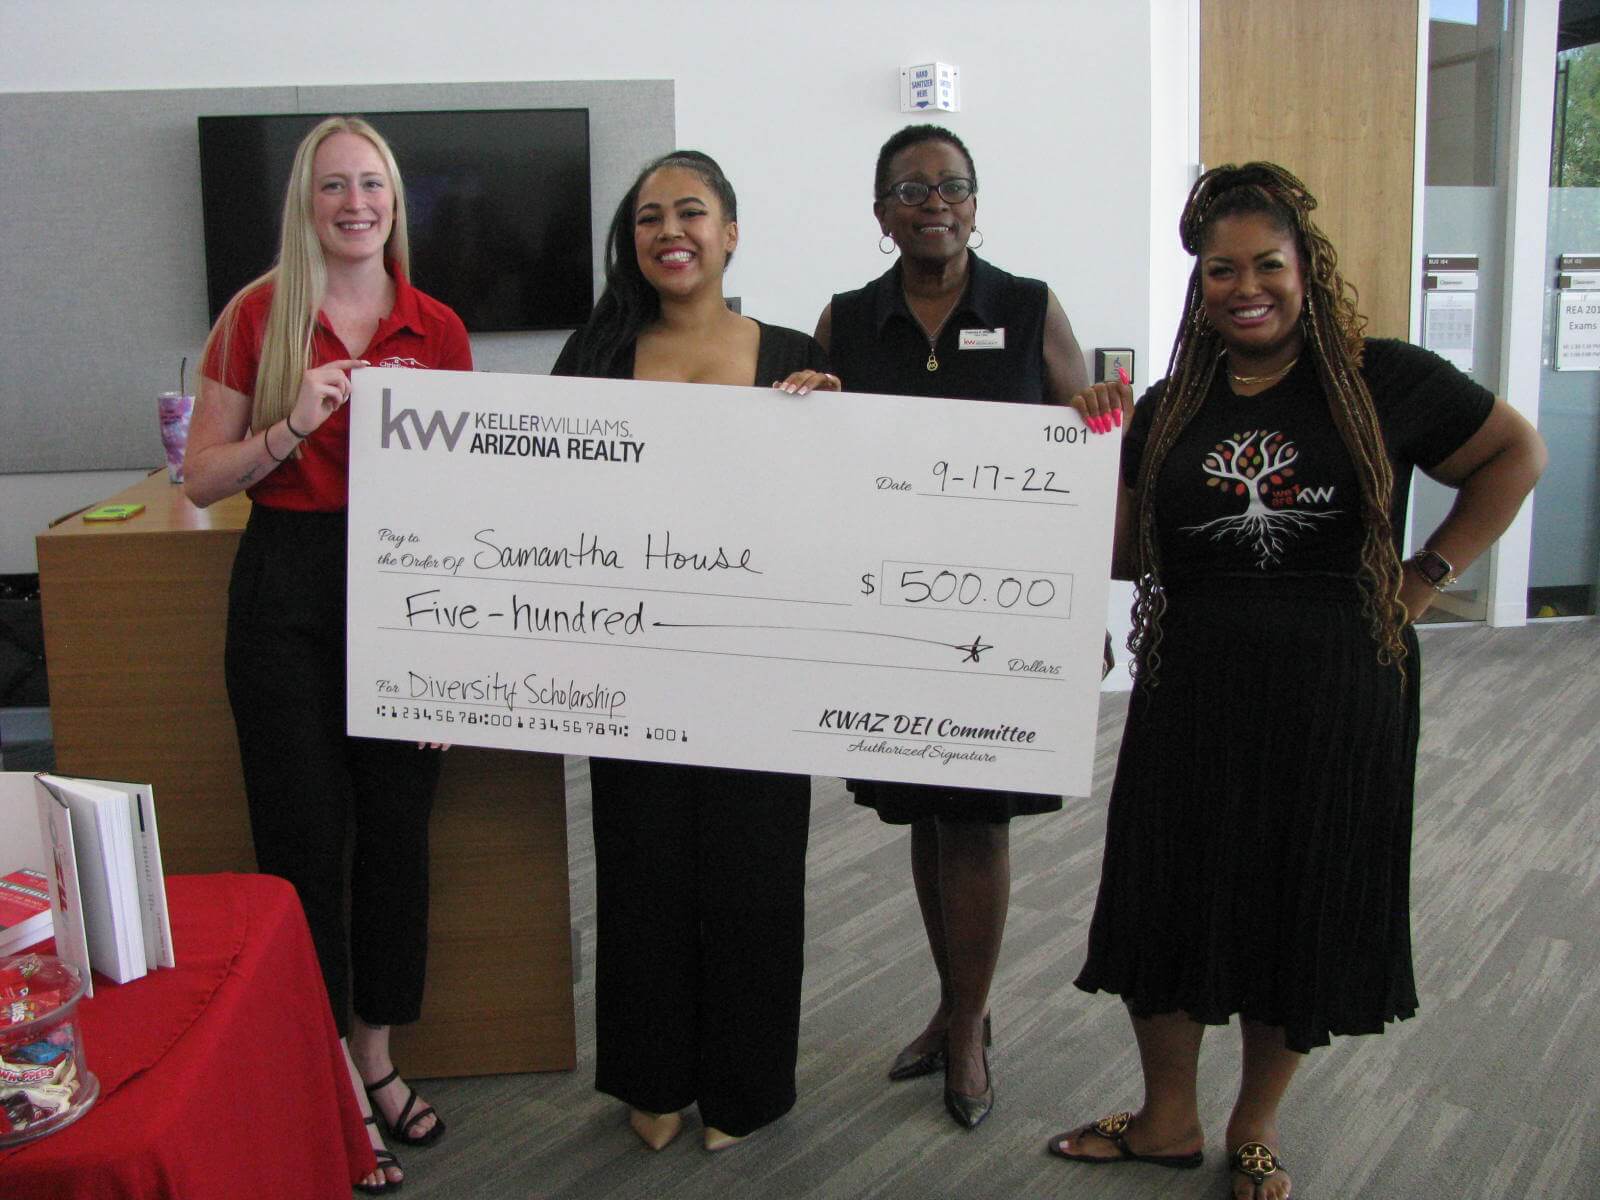 Sarah Jesseph (left), Samantha House (2nd from left), Patricia Whorton (2nd from right), and Kionna Comer, Chairperson of the Diversity, Equity, and Inclusion Committee (right), presenting $500 scholarship to Samantha House at the Scottsdale Community College Real Estate Job Fair on September 17, 2022.